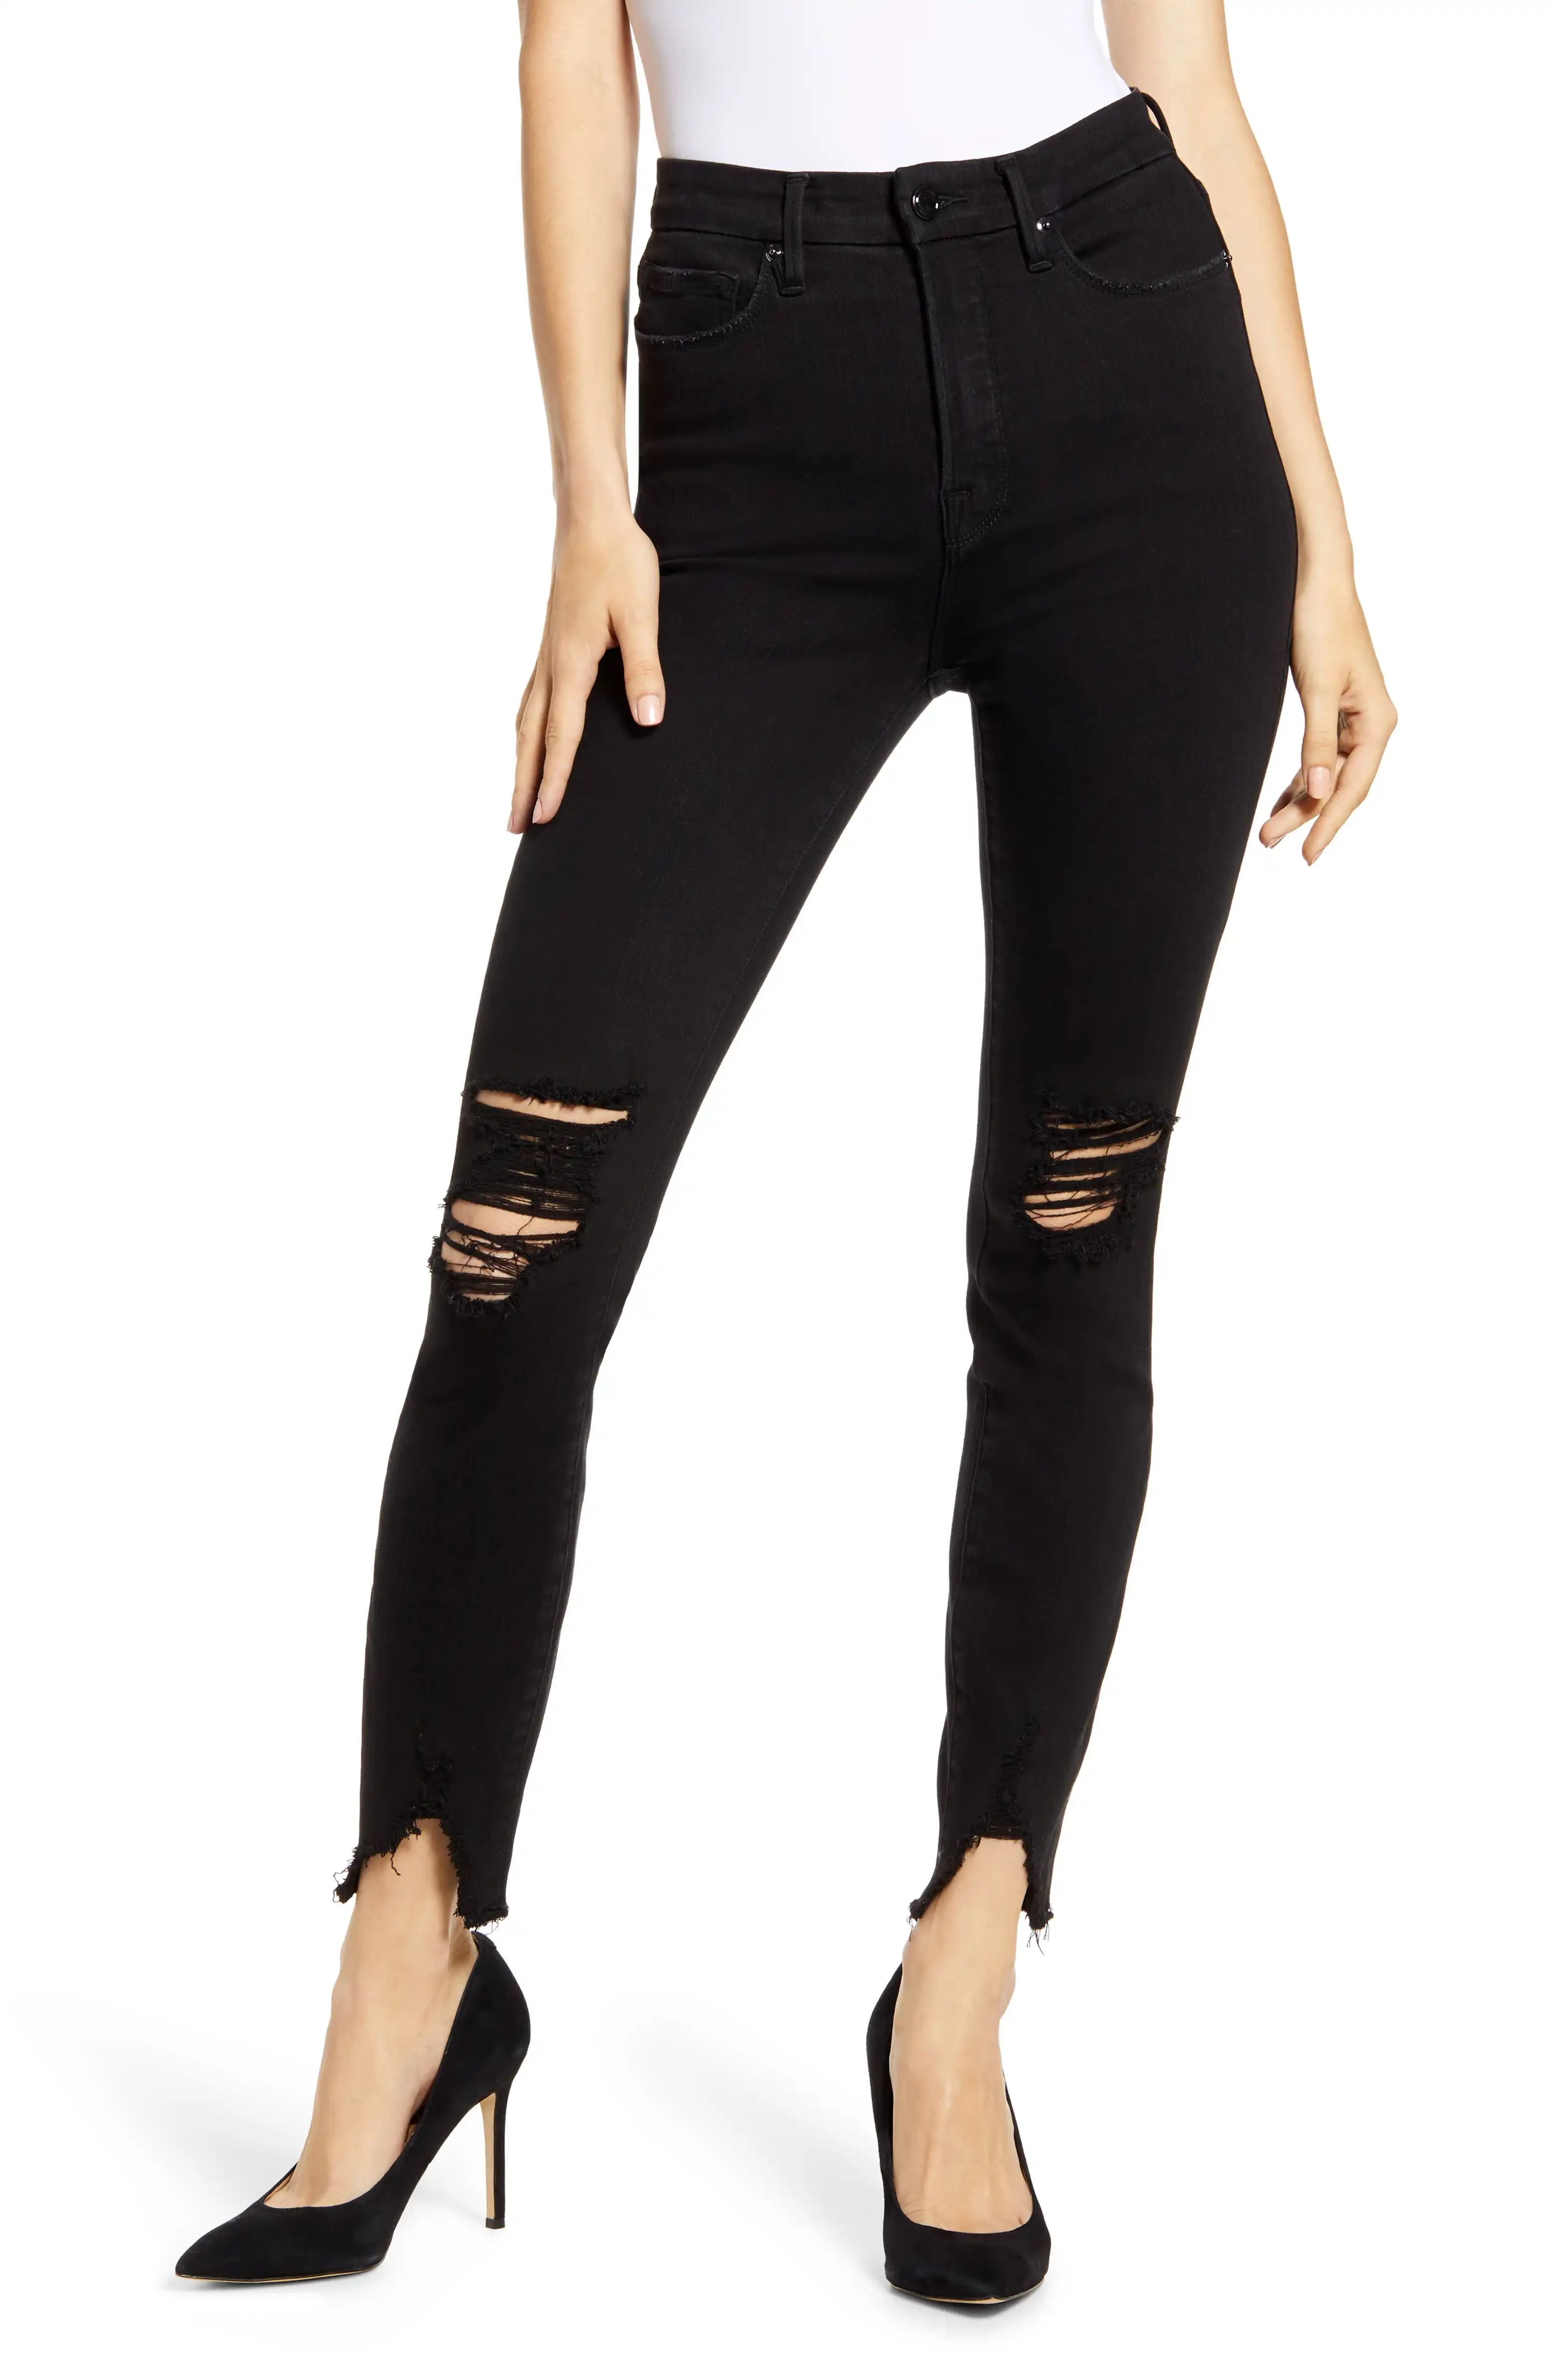 Good Body Ripped High Waist Skinny Jeans | Nordstrom